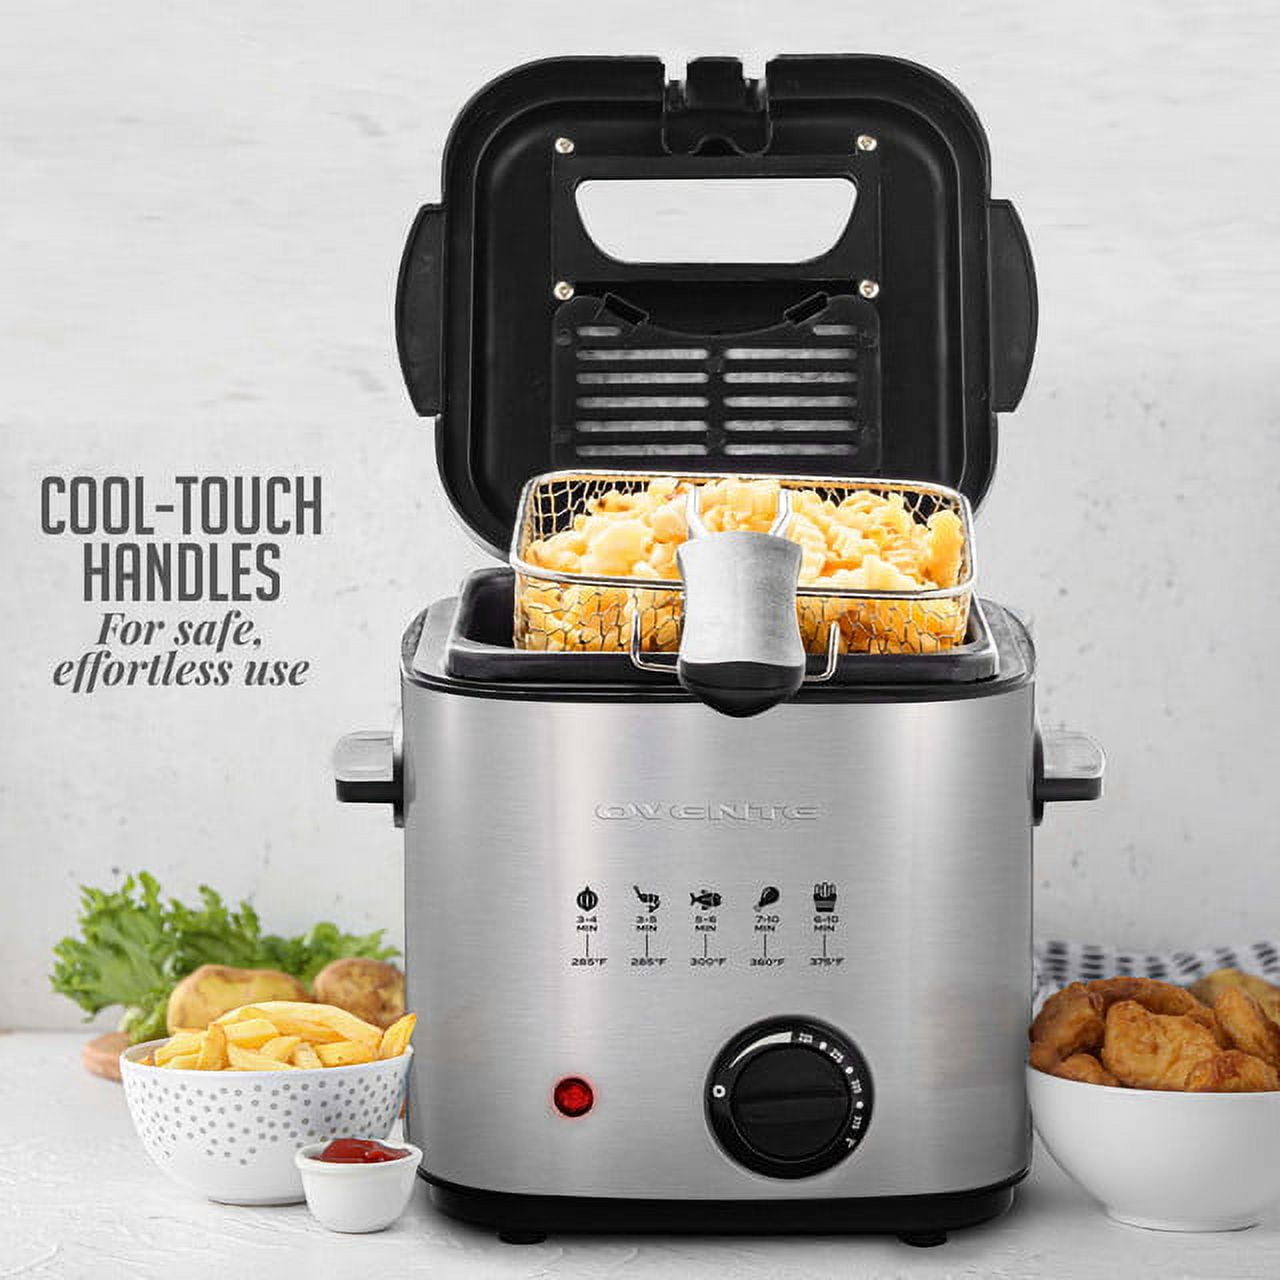 Ovente Electric Deep Fryer 2 Liter, 1500W with Viewing Window, Adjustable Temperature Knob and Removable Stainless Steel Frying Basket, Perfect for